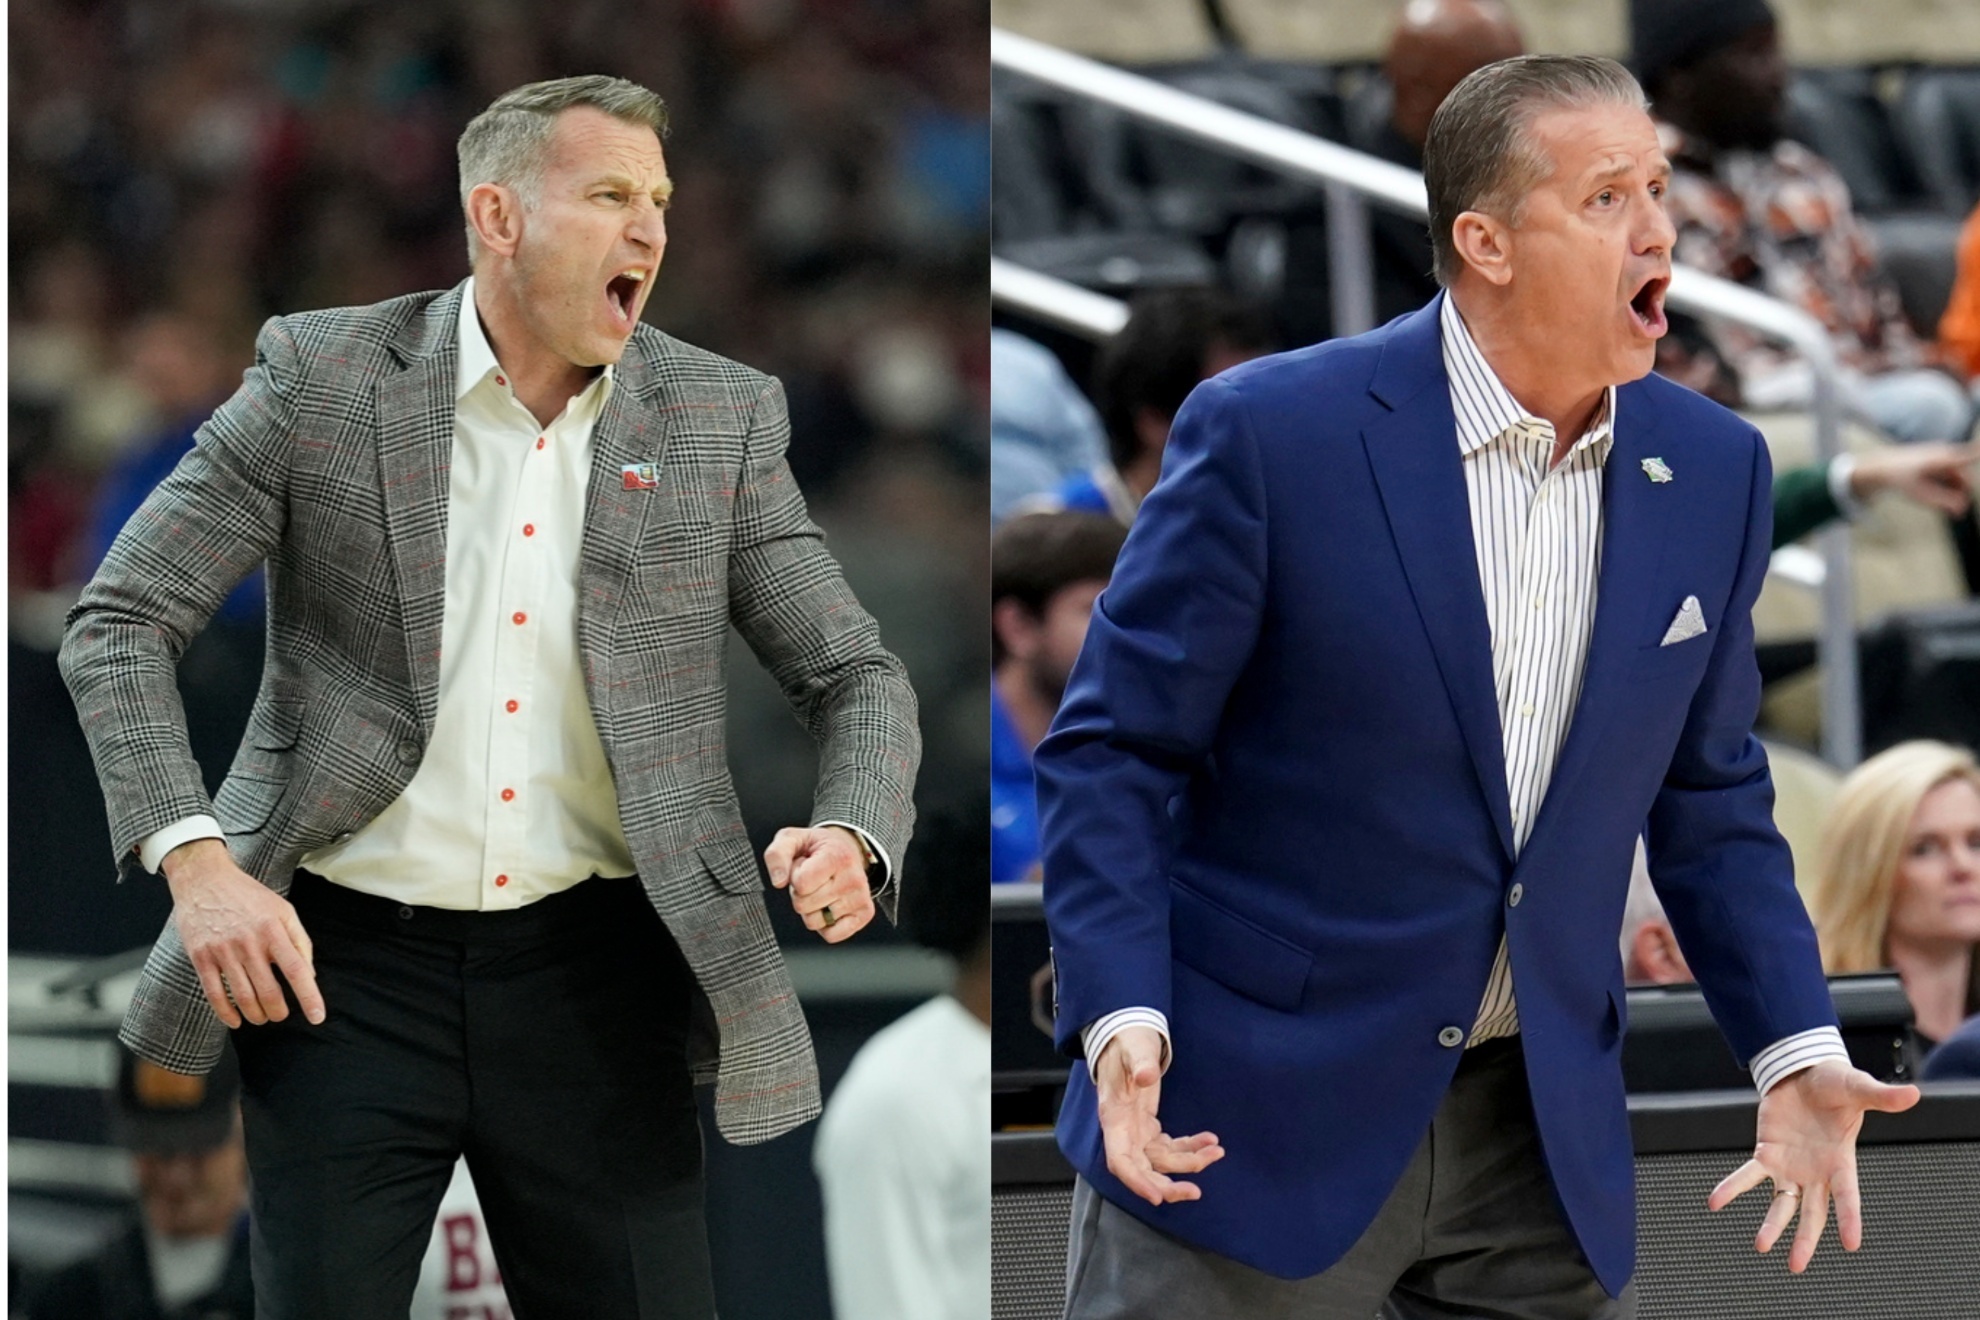 Nate Oats (L) would be the ideal candidate to replace John Calipari at Kentucky.